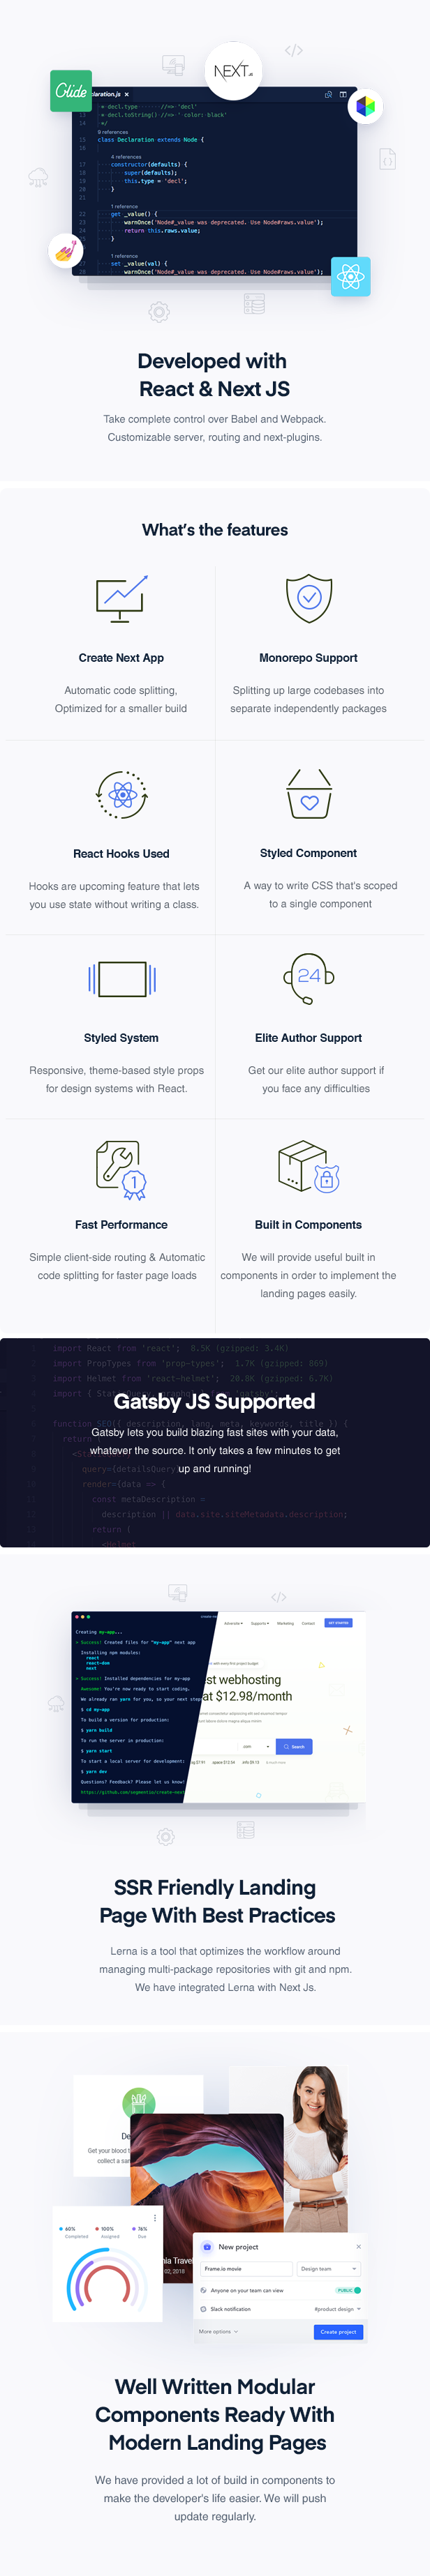 SuperProps - React Landing Page Templates with Next JS & Gatsby JS - 3